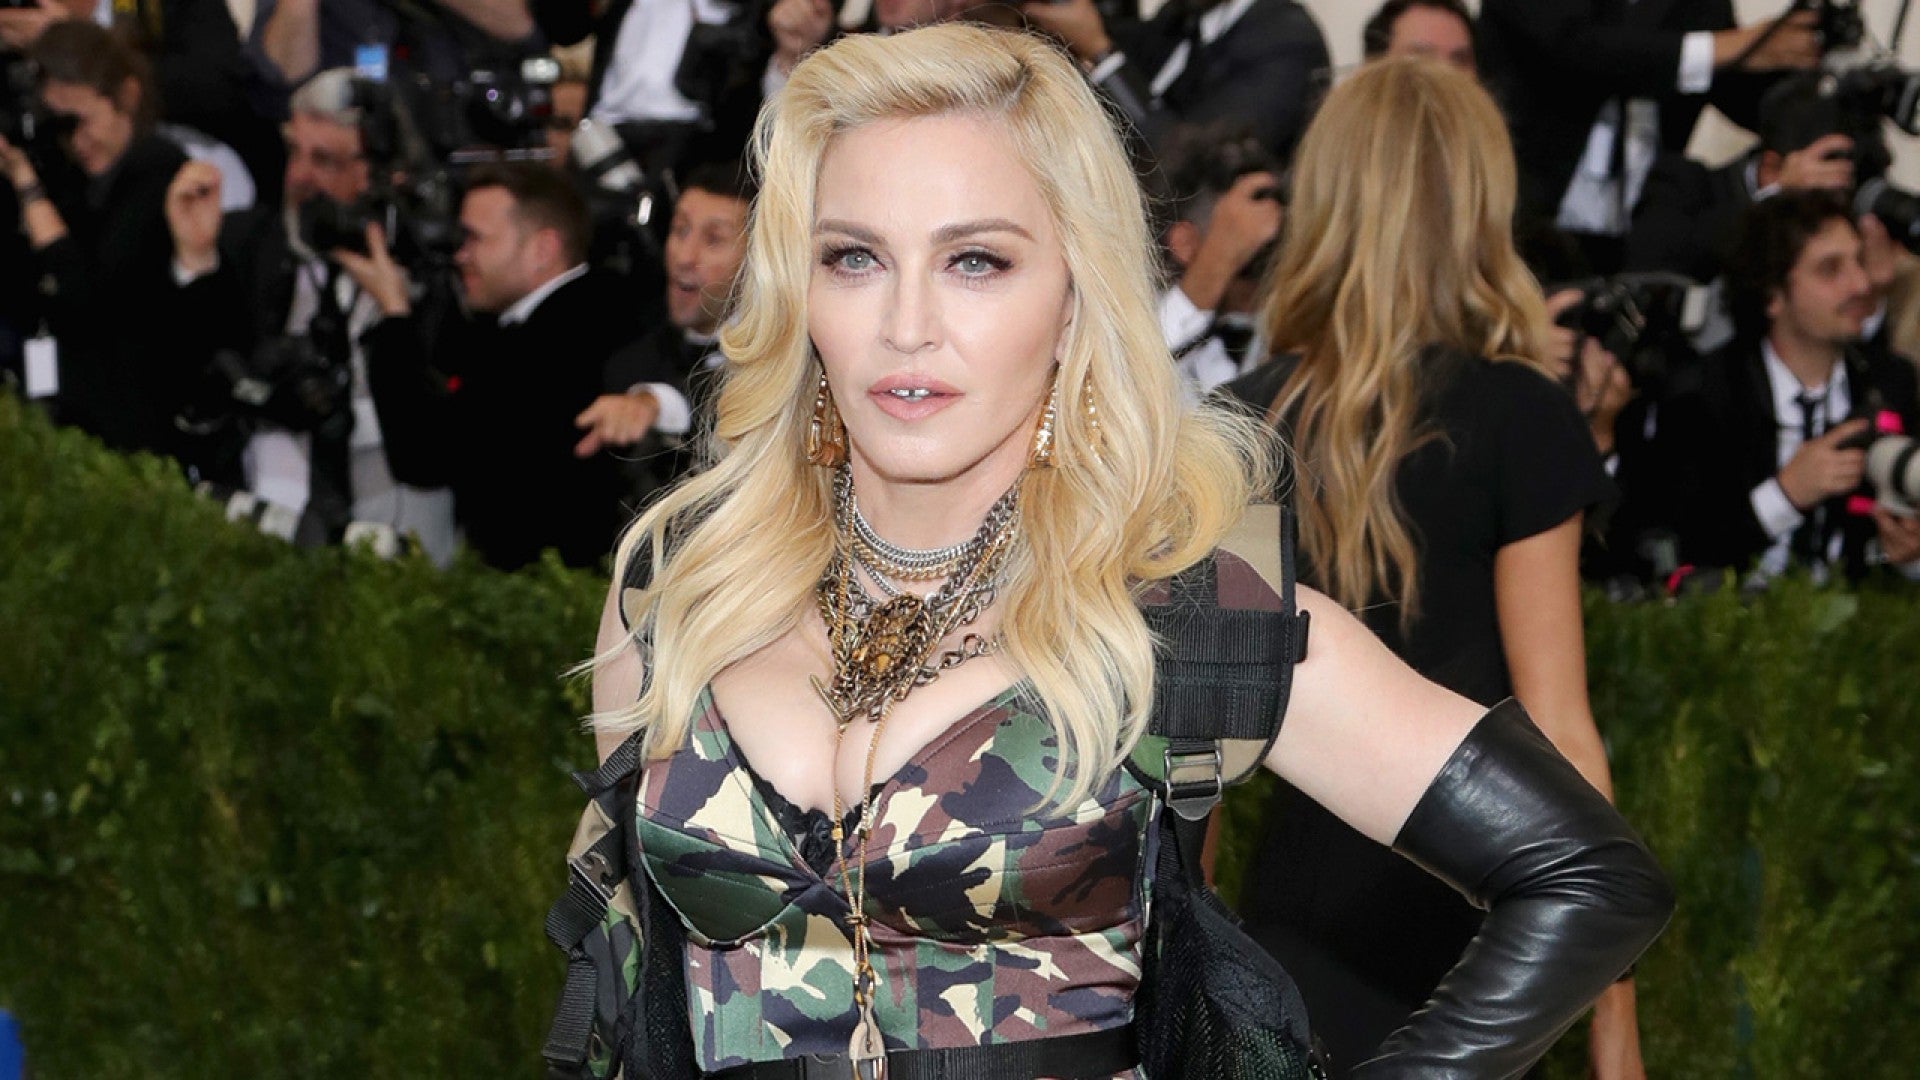 Madonna says her Met Gala dress was a political statement about women's  rights